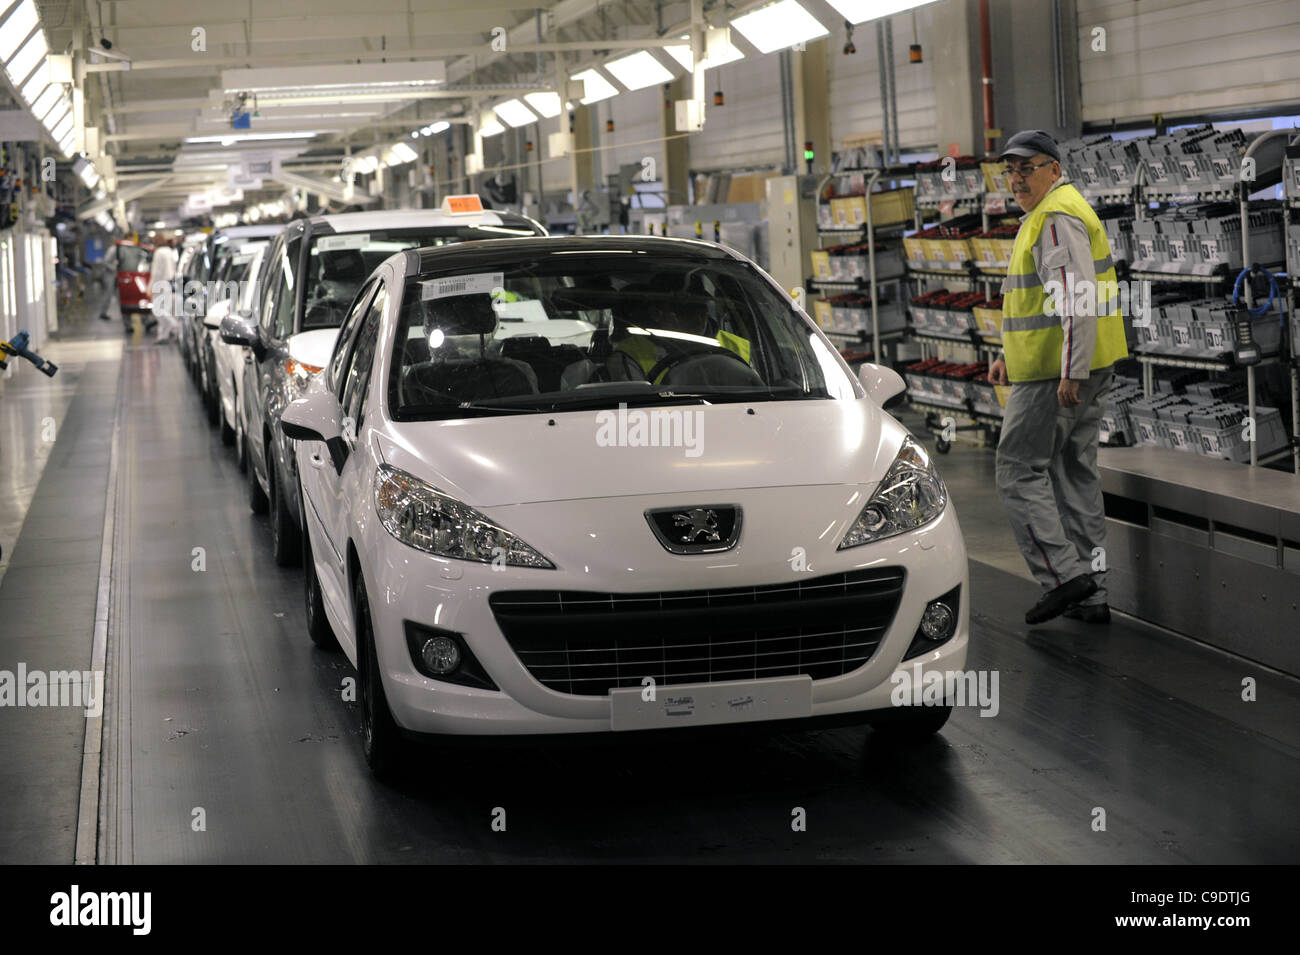 The millionth car rolled off the production line of PSA Peugeot Citroen  plant in Trnava, Slovakia on November 24, 2011. It became the Peugeot 208,  which will be launched early next year.